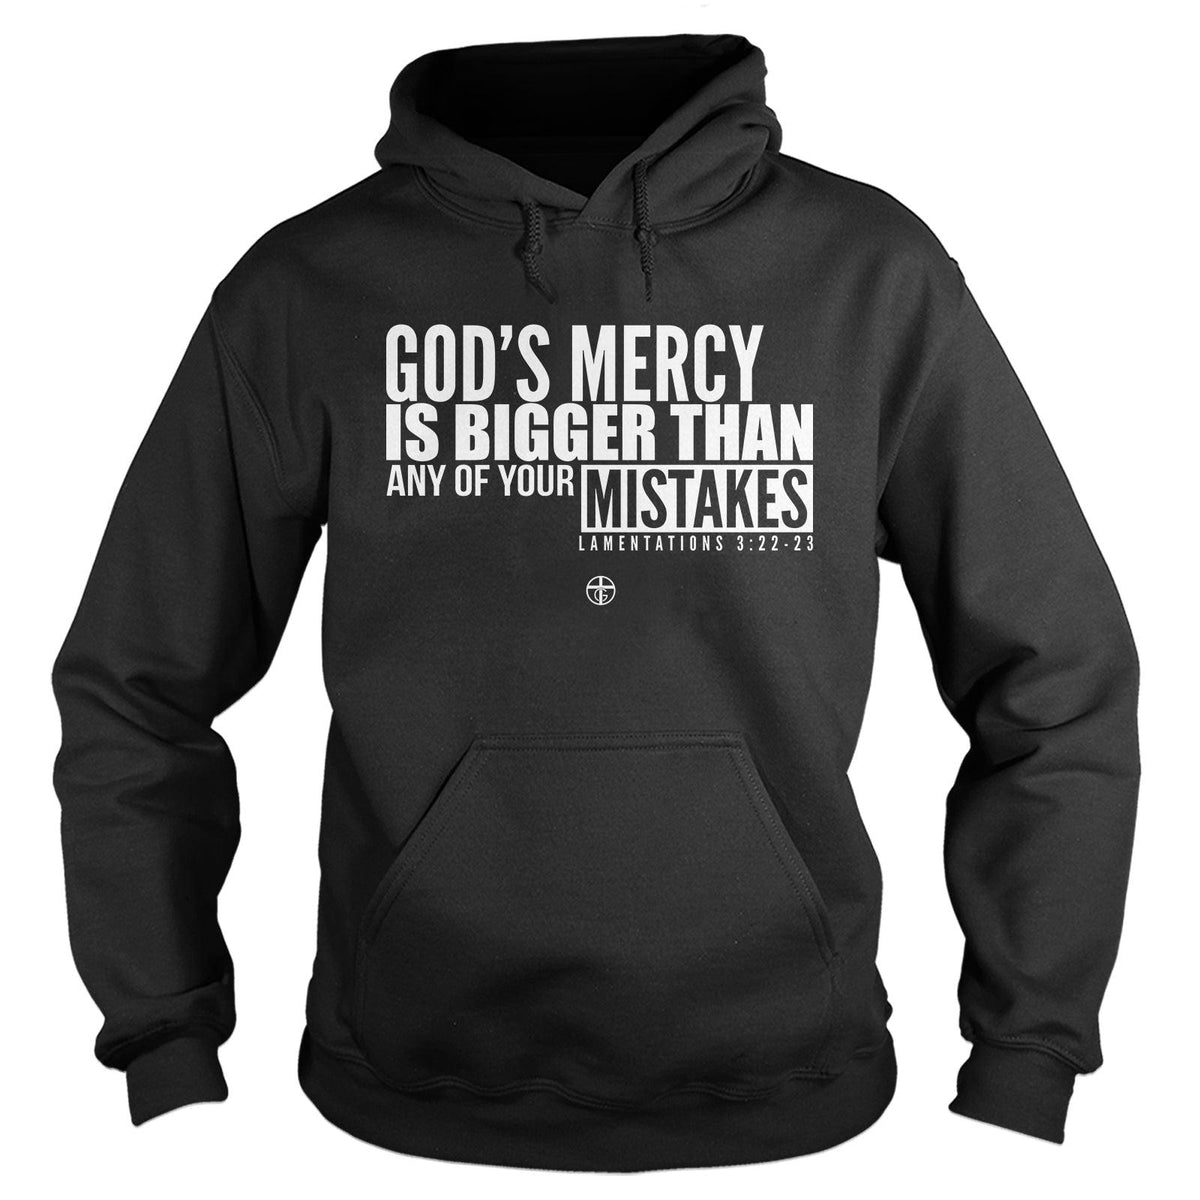 God's Mercy is Bigger Hoodie - Our True God